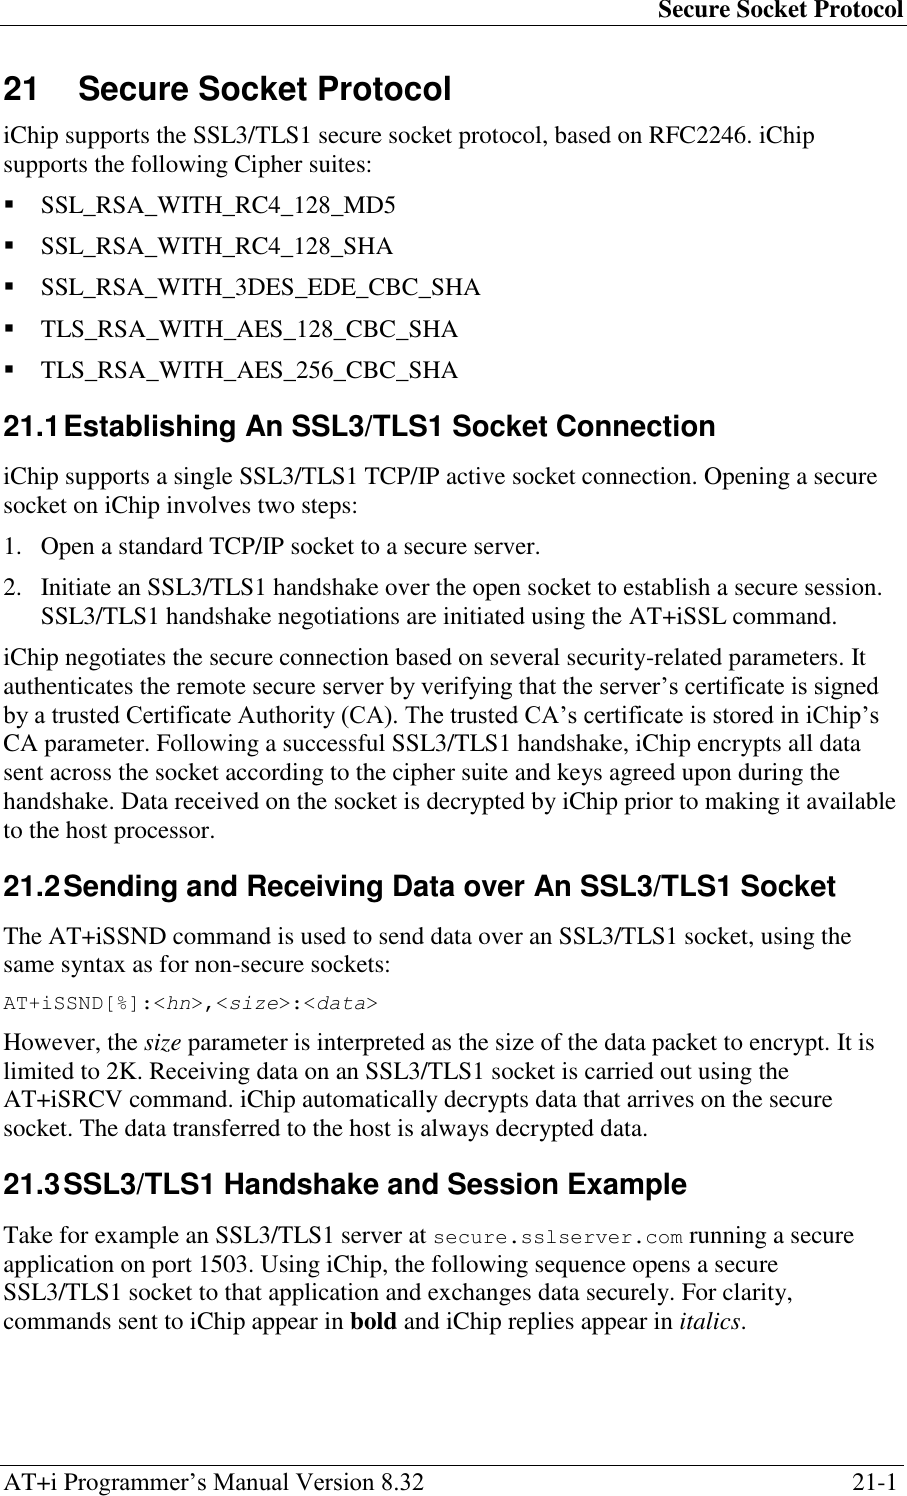 Secure Socket Protocol AT+i Programmer‘s Manual Version 8.32  21-1 21  Secure Socket Protocol iChip supports the SSL3/TLS1 secure socket protocol, based on RFC2246. iChip supports the following Cipher suites:  SSL_RSA_WITH_RC4_128_MD5  SSL_RSA_WITH_RC4_128_SHA  SSL_RSA_WITH_3DES_EDE_CBC_SHA  TLS_RSA_WITH_AES_128_CBC_SHA  TLS_RSA_WITH_AES_256_CBC_SHA 21.1 Establishing An SSL3/TLS1 Socket Connection iChip supports a single SSL3/TLS1 TCP/IP active socket connection. Opening a secure socket on iChip involves two steps: 1. Open a standard TCP/IP socket to a secure server. 2. Initiate an SSL3/TLS1 handshake over the open socket to establish a secure session. SSL3/TLS1 handshake negotiations are initiated using the AT+iSSL command. iChip negotiates the secure connection based on several security-related parameters. It authenticates the remote secure server by verifying that the server‘s certificate is signed by a trusted Certificate Authority (CA). The trusted CA‘s certificate is stored in iChip‘s CA parameter. Following a successful SSL3/TLS1 handshake, iChip encrypts all data sent across the socket according to the cipher suite and keys agreed upon during the handshake. Data received on the socket is decrypted by iChip prior to making it available to the host processor. 21.2 Sending and Receiving Data over An SSL3/TLS1 Socket The AT+iSSND command is used to send data over an SSL3/TLS1 socket, using the same syntax as for non-secure sockets: AT+iSSND[%]:&lt;hn&gt;,&lt;size&gt;:&lt;data&gt; However, the size parameter is interpreted as the size of the data packet to encrypt. It is limited to 2K. Receiving data on an SSL3/TLS1 socket is carried out using the AT+iSRCV command. iChip automatically decrypts data that arrives on the secure socket. The data transferred to the host is always decrypted data. 21.3 SSL3/TLS1 Handshake and Session Example Take for example an SSL3/TLS1 server at secure.sslserver.com running a secure application on port 1503. Using iChip, the following sequence opens a secure SSL3/TLS1 socket to that application and exchanges data securely. For clarity, commands sent to iChip appear in bold and iChip replies appear in italics. 